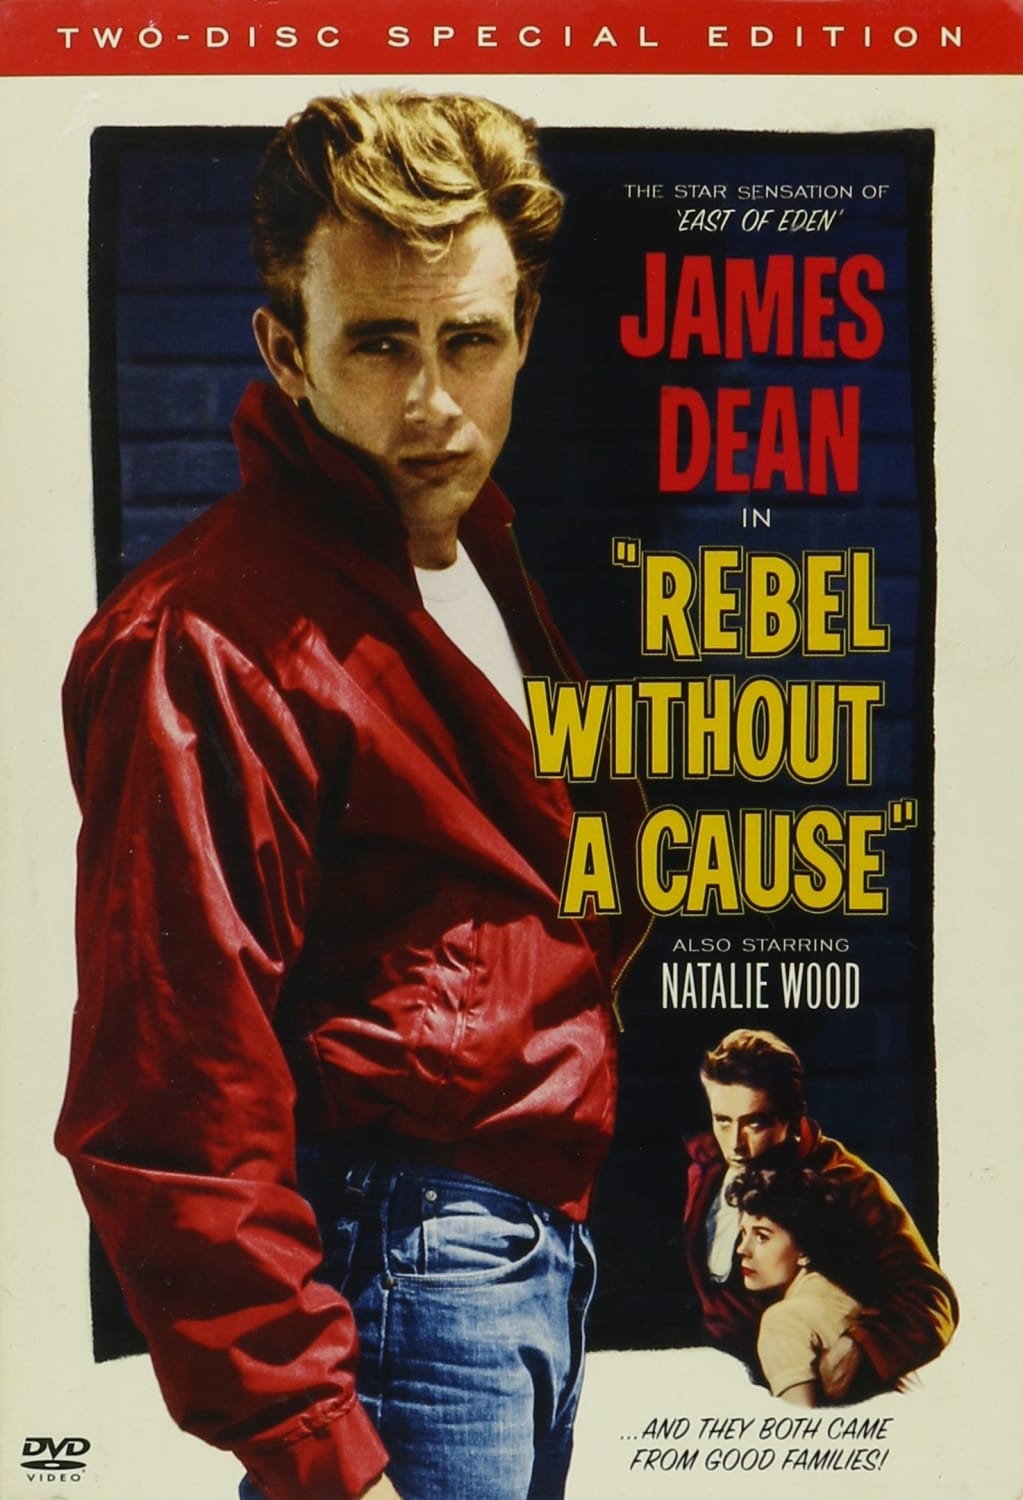 Rebel Without a Cause (DVD) on MovieShack